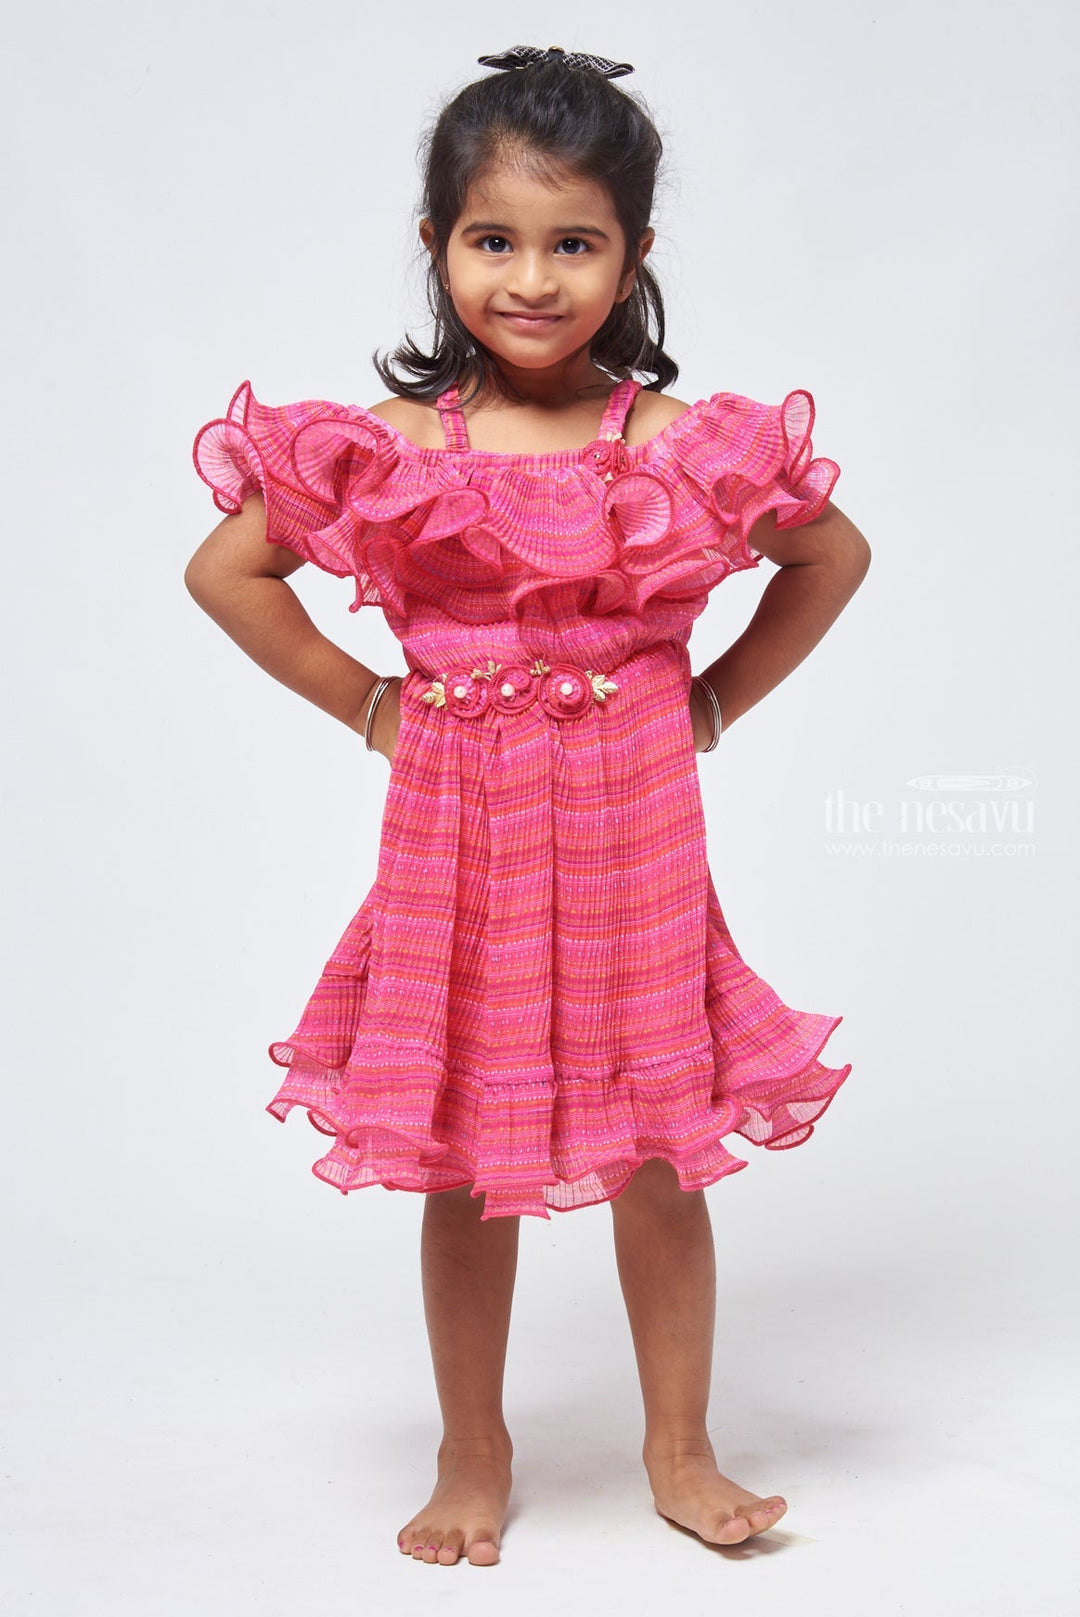 The Nesavu Baby Frock / Jhabla Ruffled Pink Geometric Outfit for Baby Girl Charm Nesavu 18 (2Y) / Pink BFJ429B-18 Bestselling baby frocks for new arrivals | Baby Casual Fancy Frock | The Nesavu